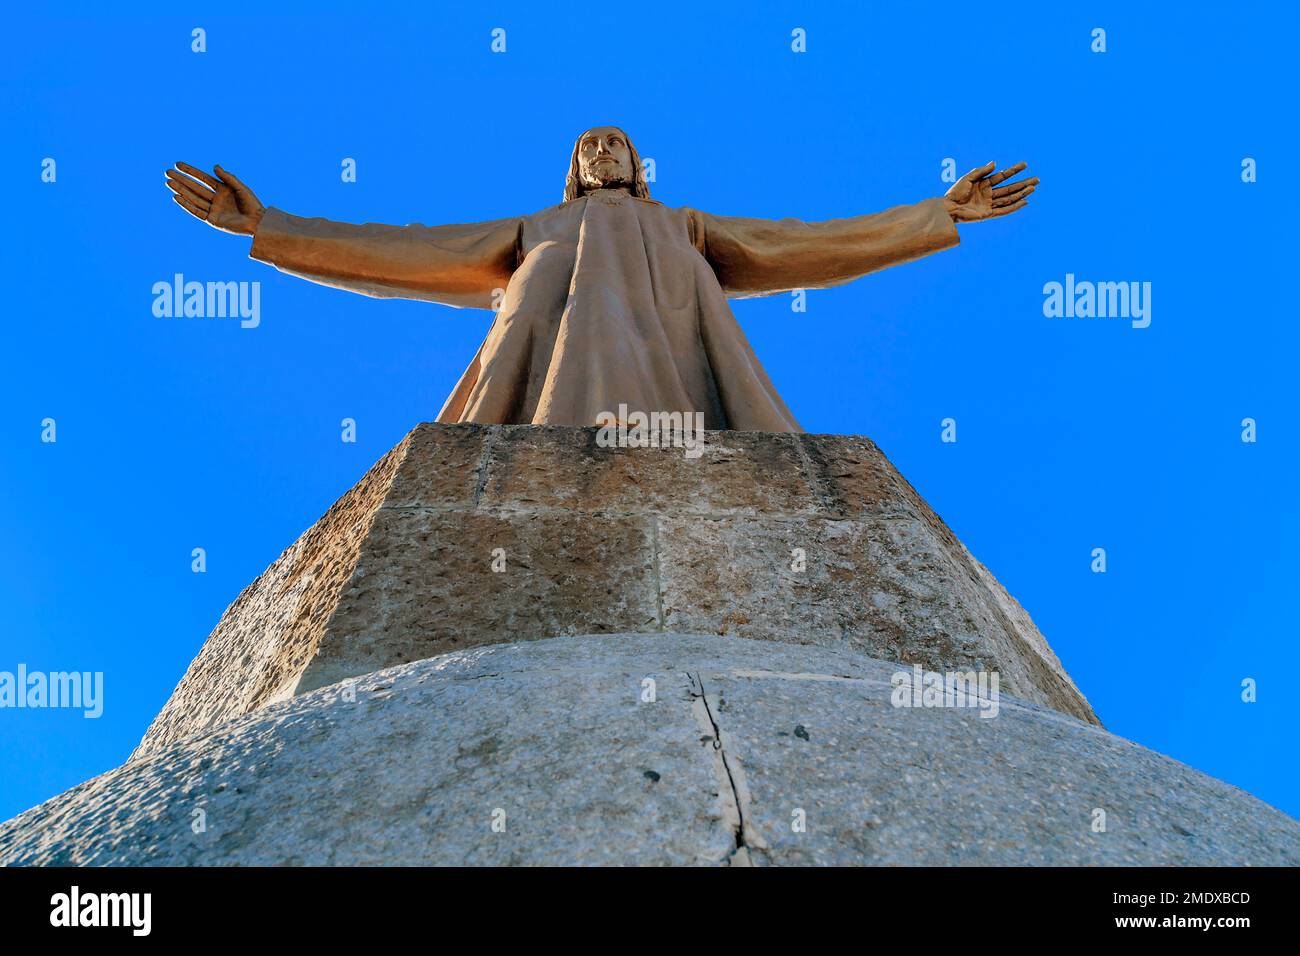 BARCELONA, SPAIN - MAY 13, 2017: It is Jesus established above the Temple of the Sacred Heart, which is located at the highest place of the city. Stock Photo